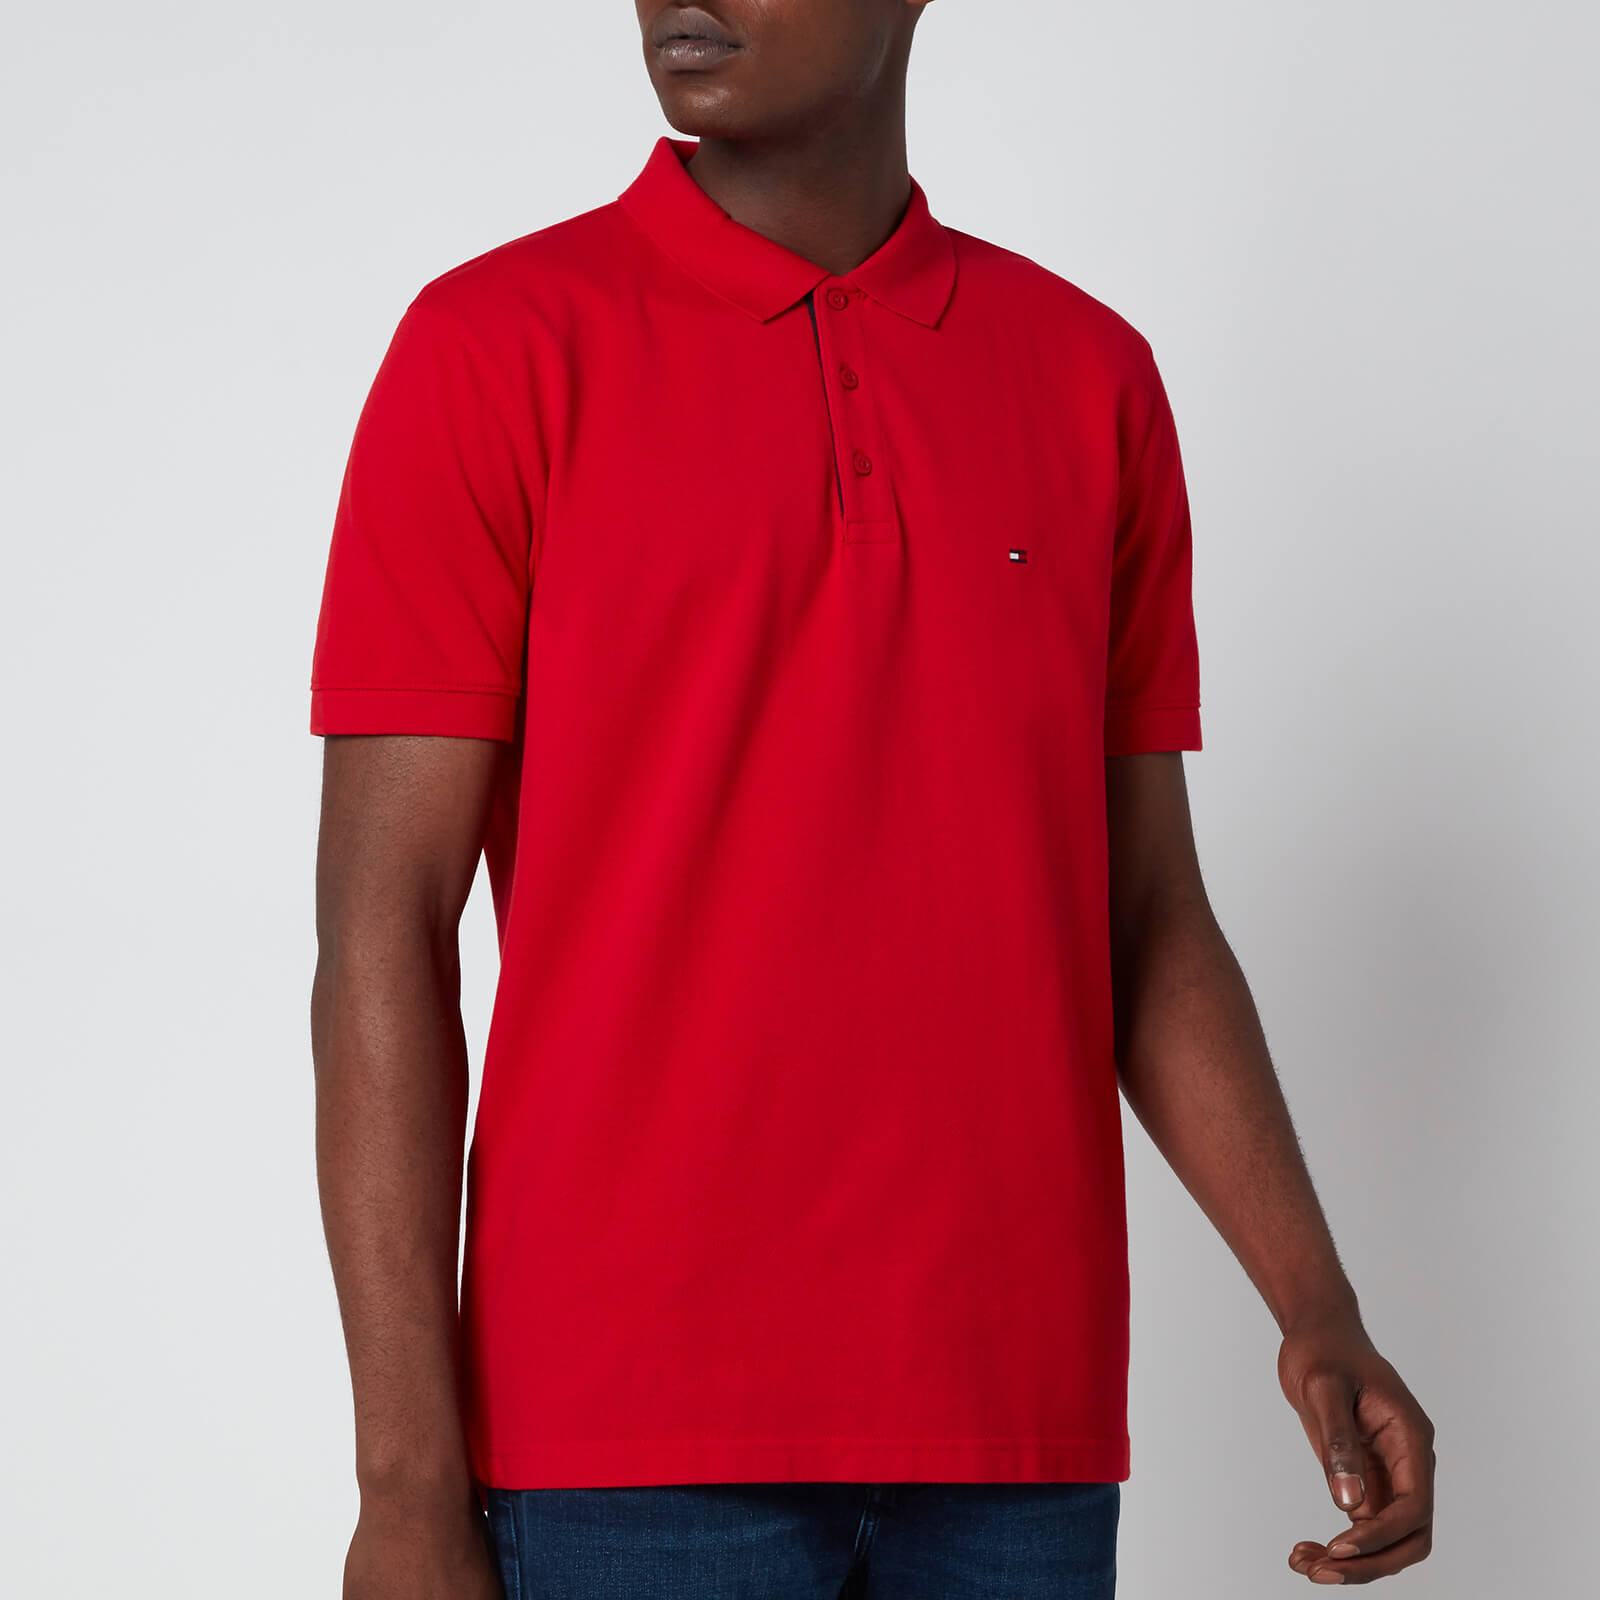 Tommy Hilfiger Men's Contrast Placket Polo Shirt - Primary Red - L